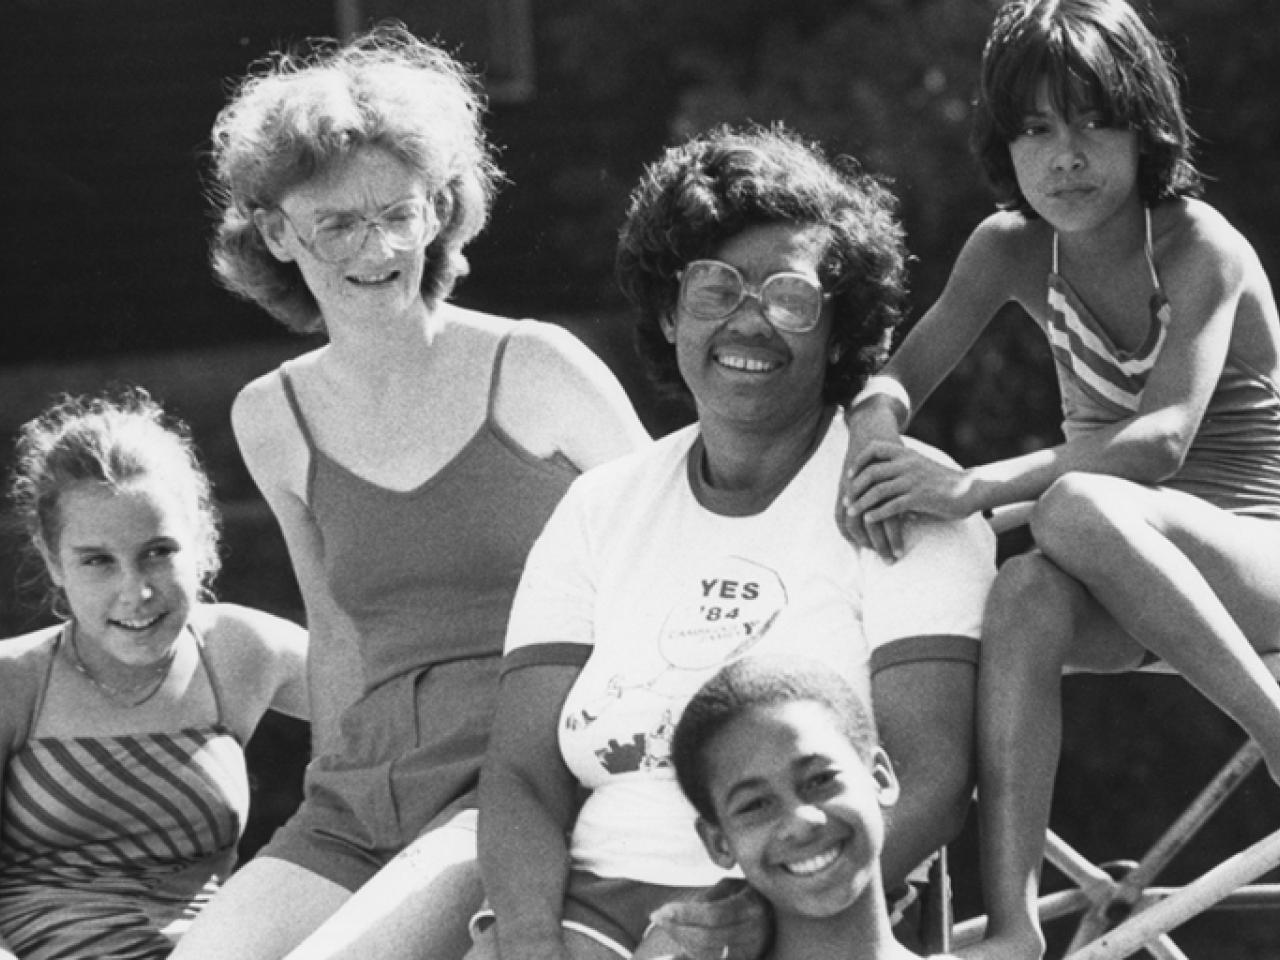 In this black and white photo from the 1980s, five teens and children of various races sit on playground equipment smiling on a bright summer’s day.